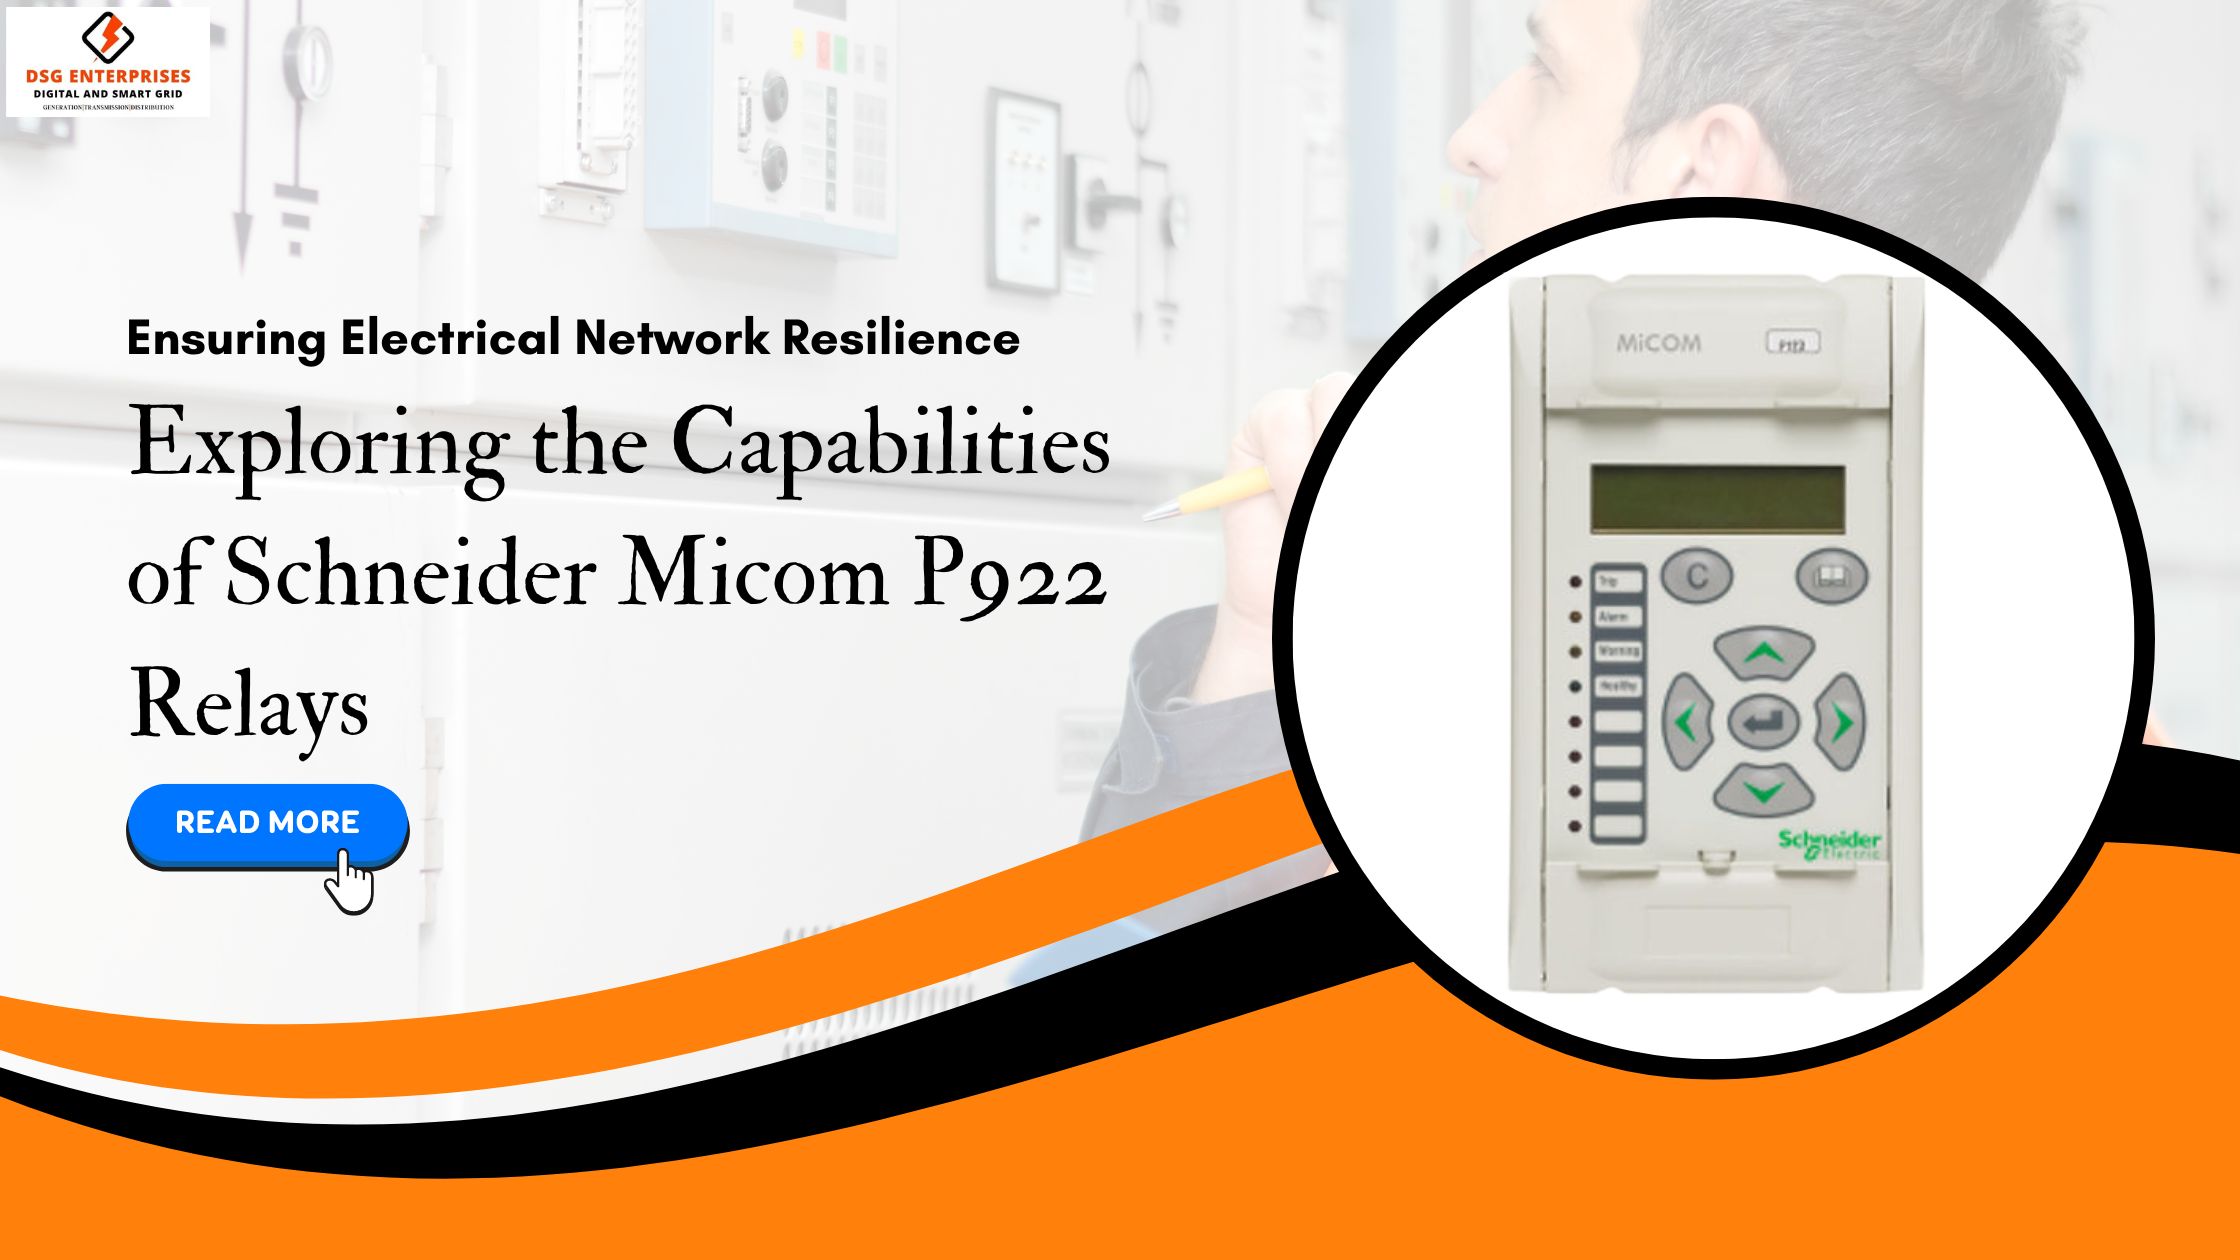 You are currently viewing Ensuring Electrical Network Resilience: Exploring the Capabilities of Schneider Micom P922 Relays.